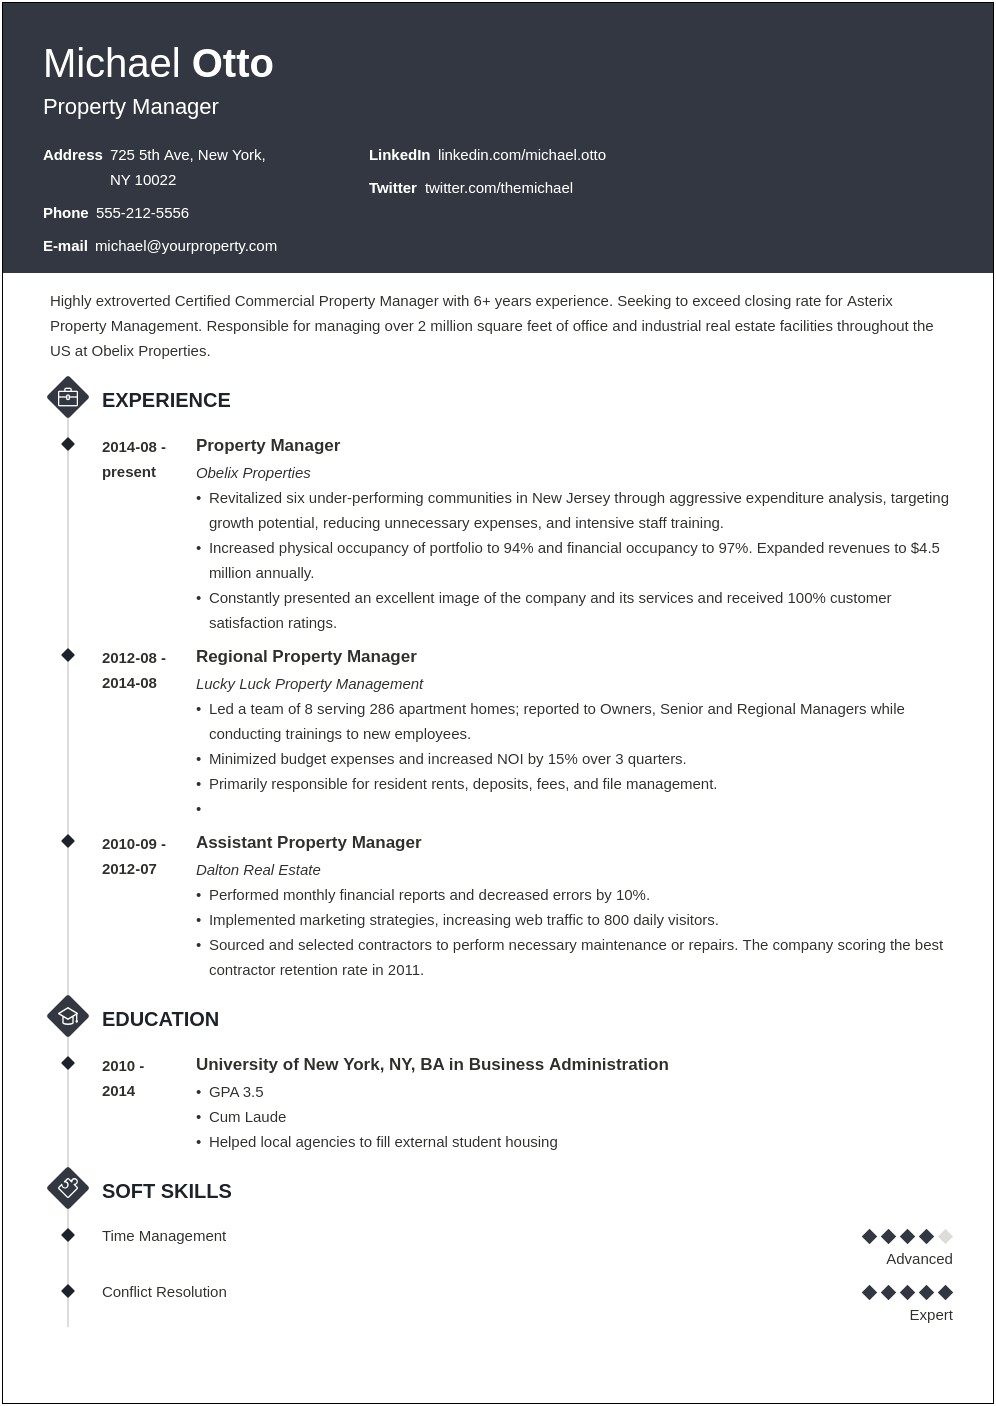 Examples Of Property Manager Resume